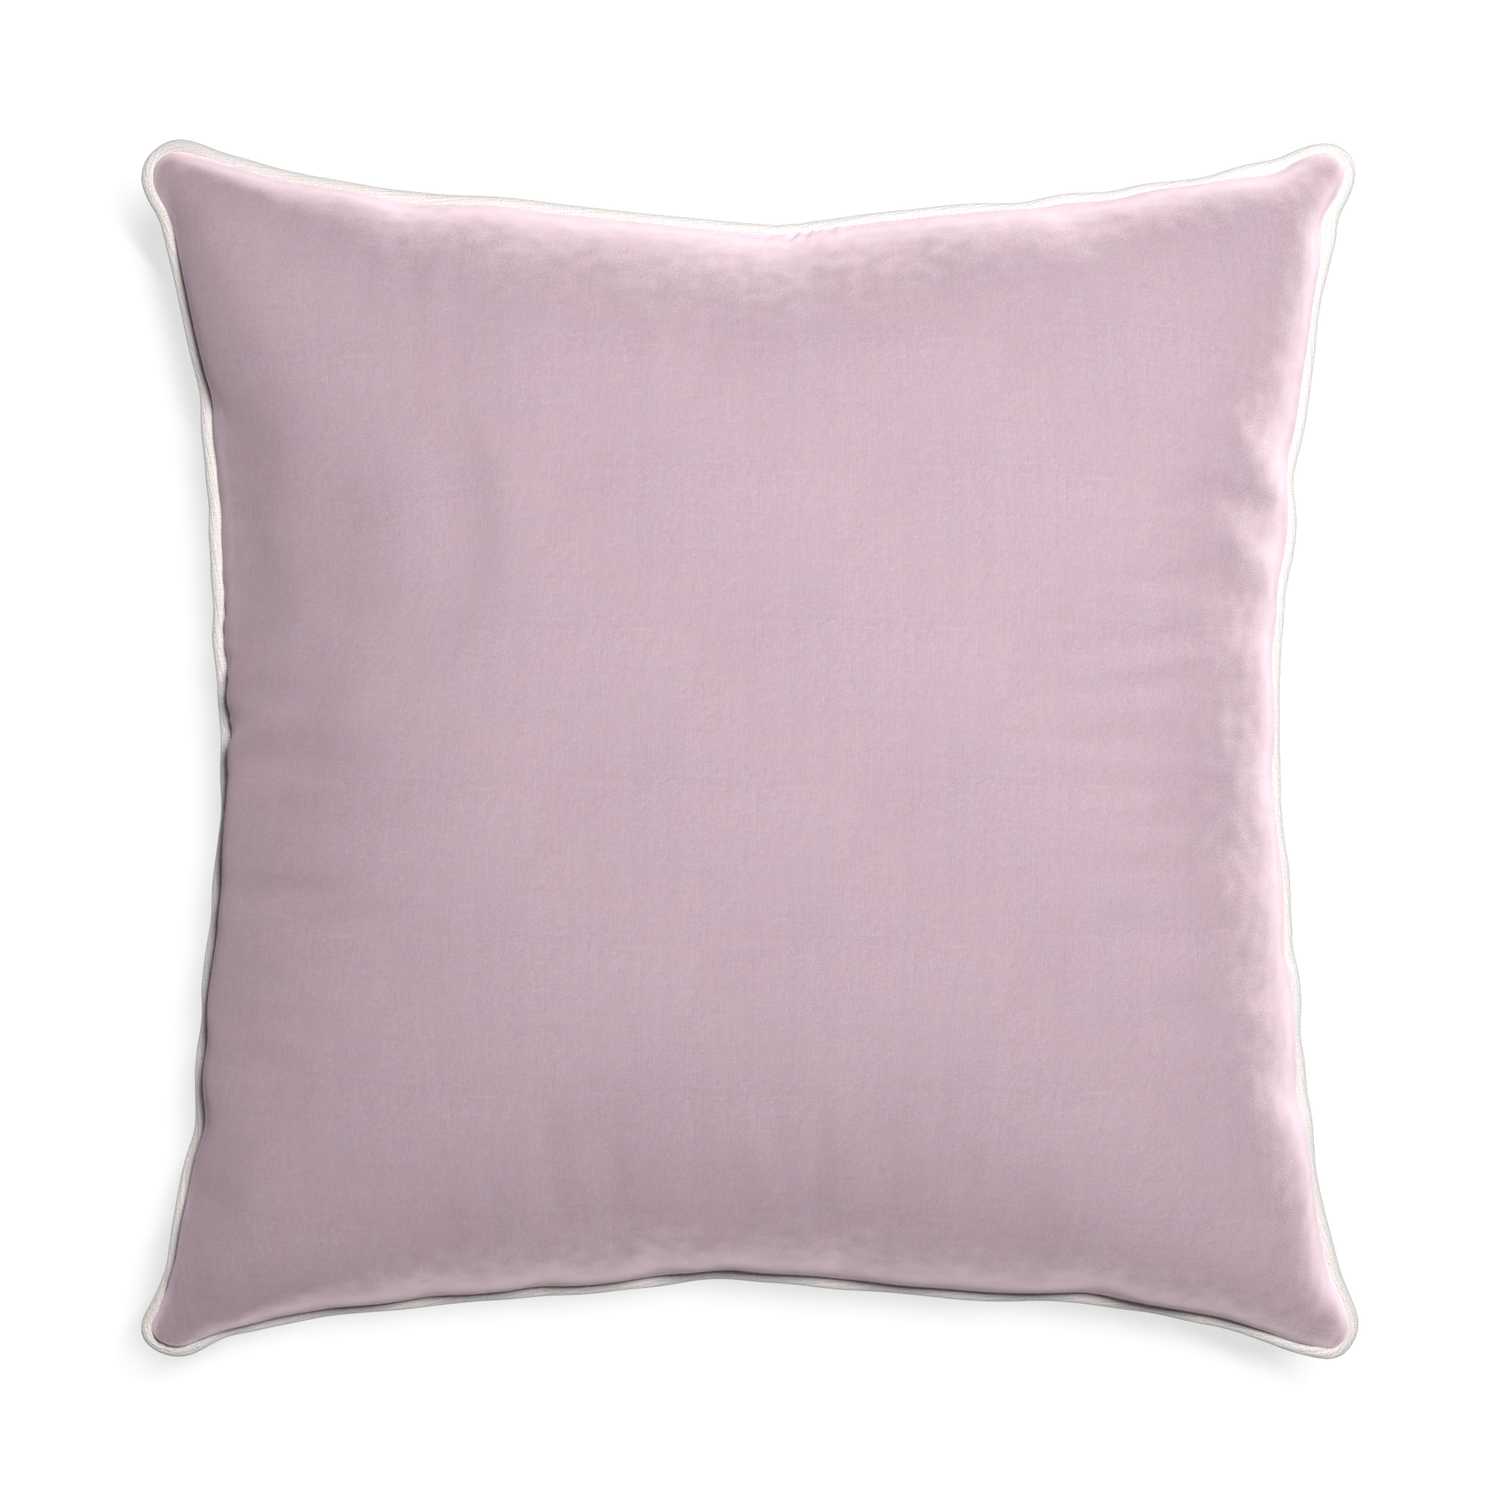 Euro-sham lilac velvet custom lilacpillow with snow piping on white background